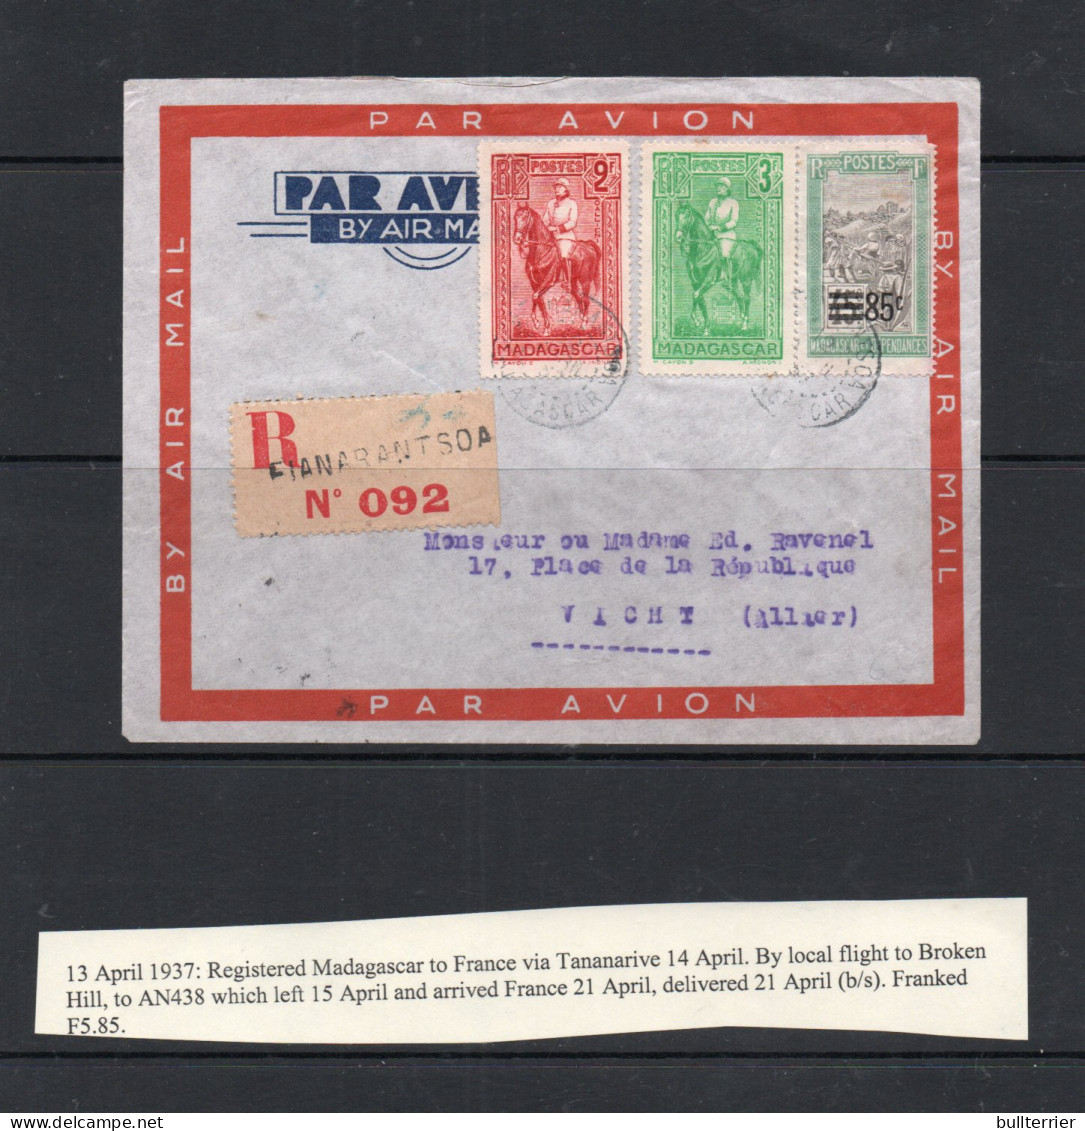 MADAGASCAR - 1937  REG COVER FROM FIANARANTSOA  TO VICHY WITH BACKSTAMP - Airmail